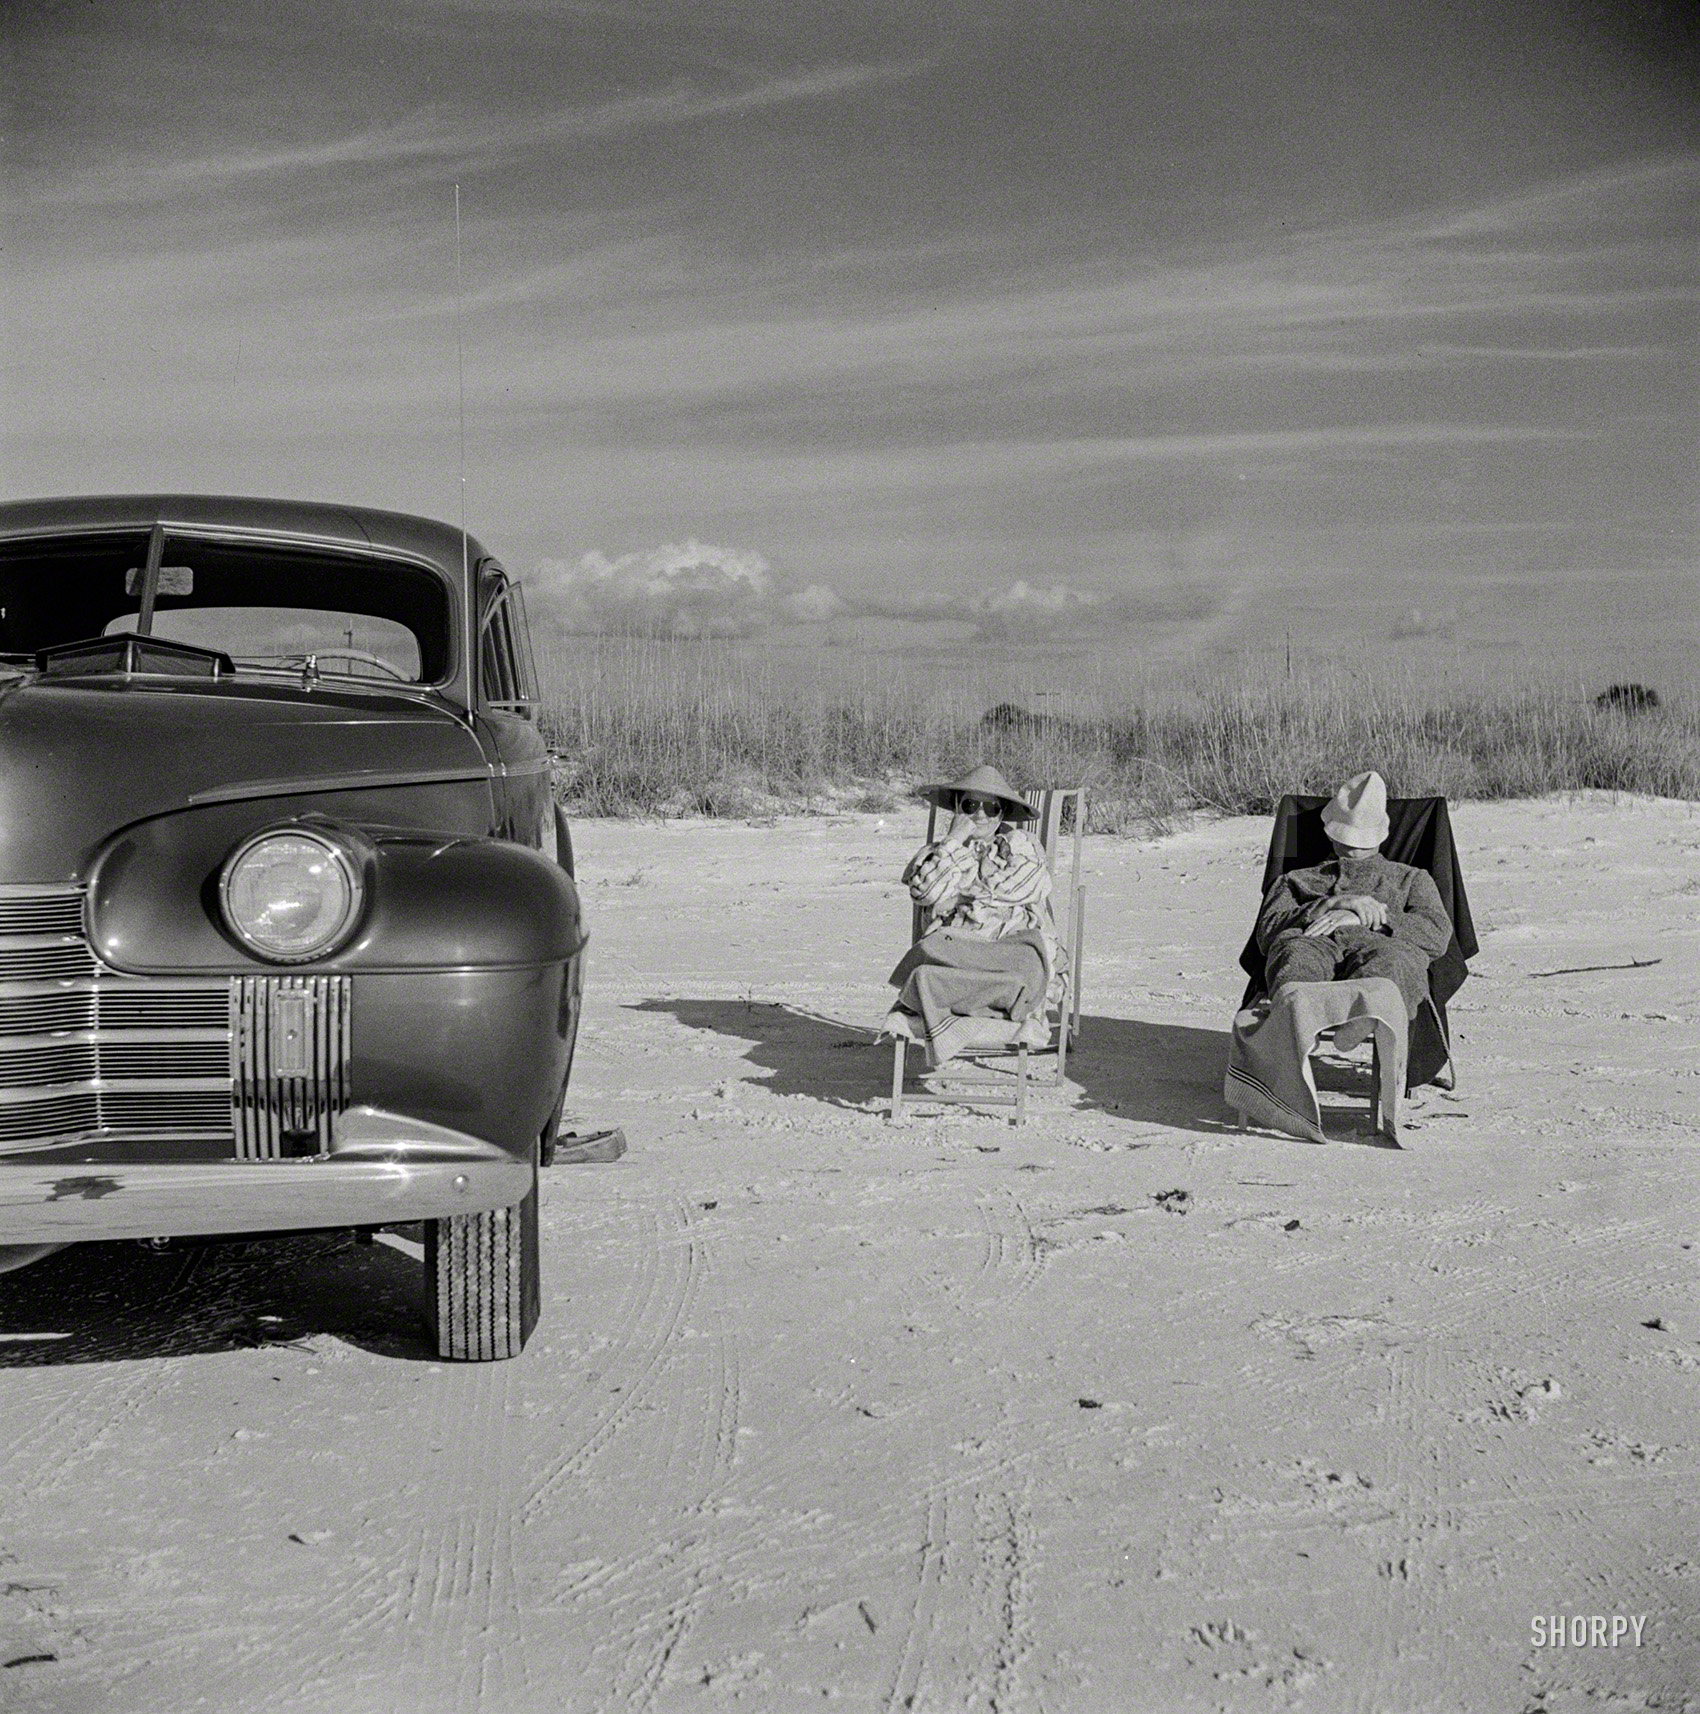 January 1941. "Guests of Sarasota, Fla., trailer park enjoying the sun and sea breeze at the beach." Photo by Marion Post Wolcott. View full size.